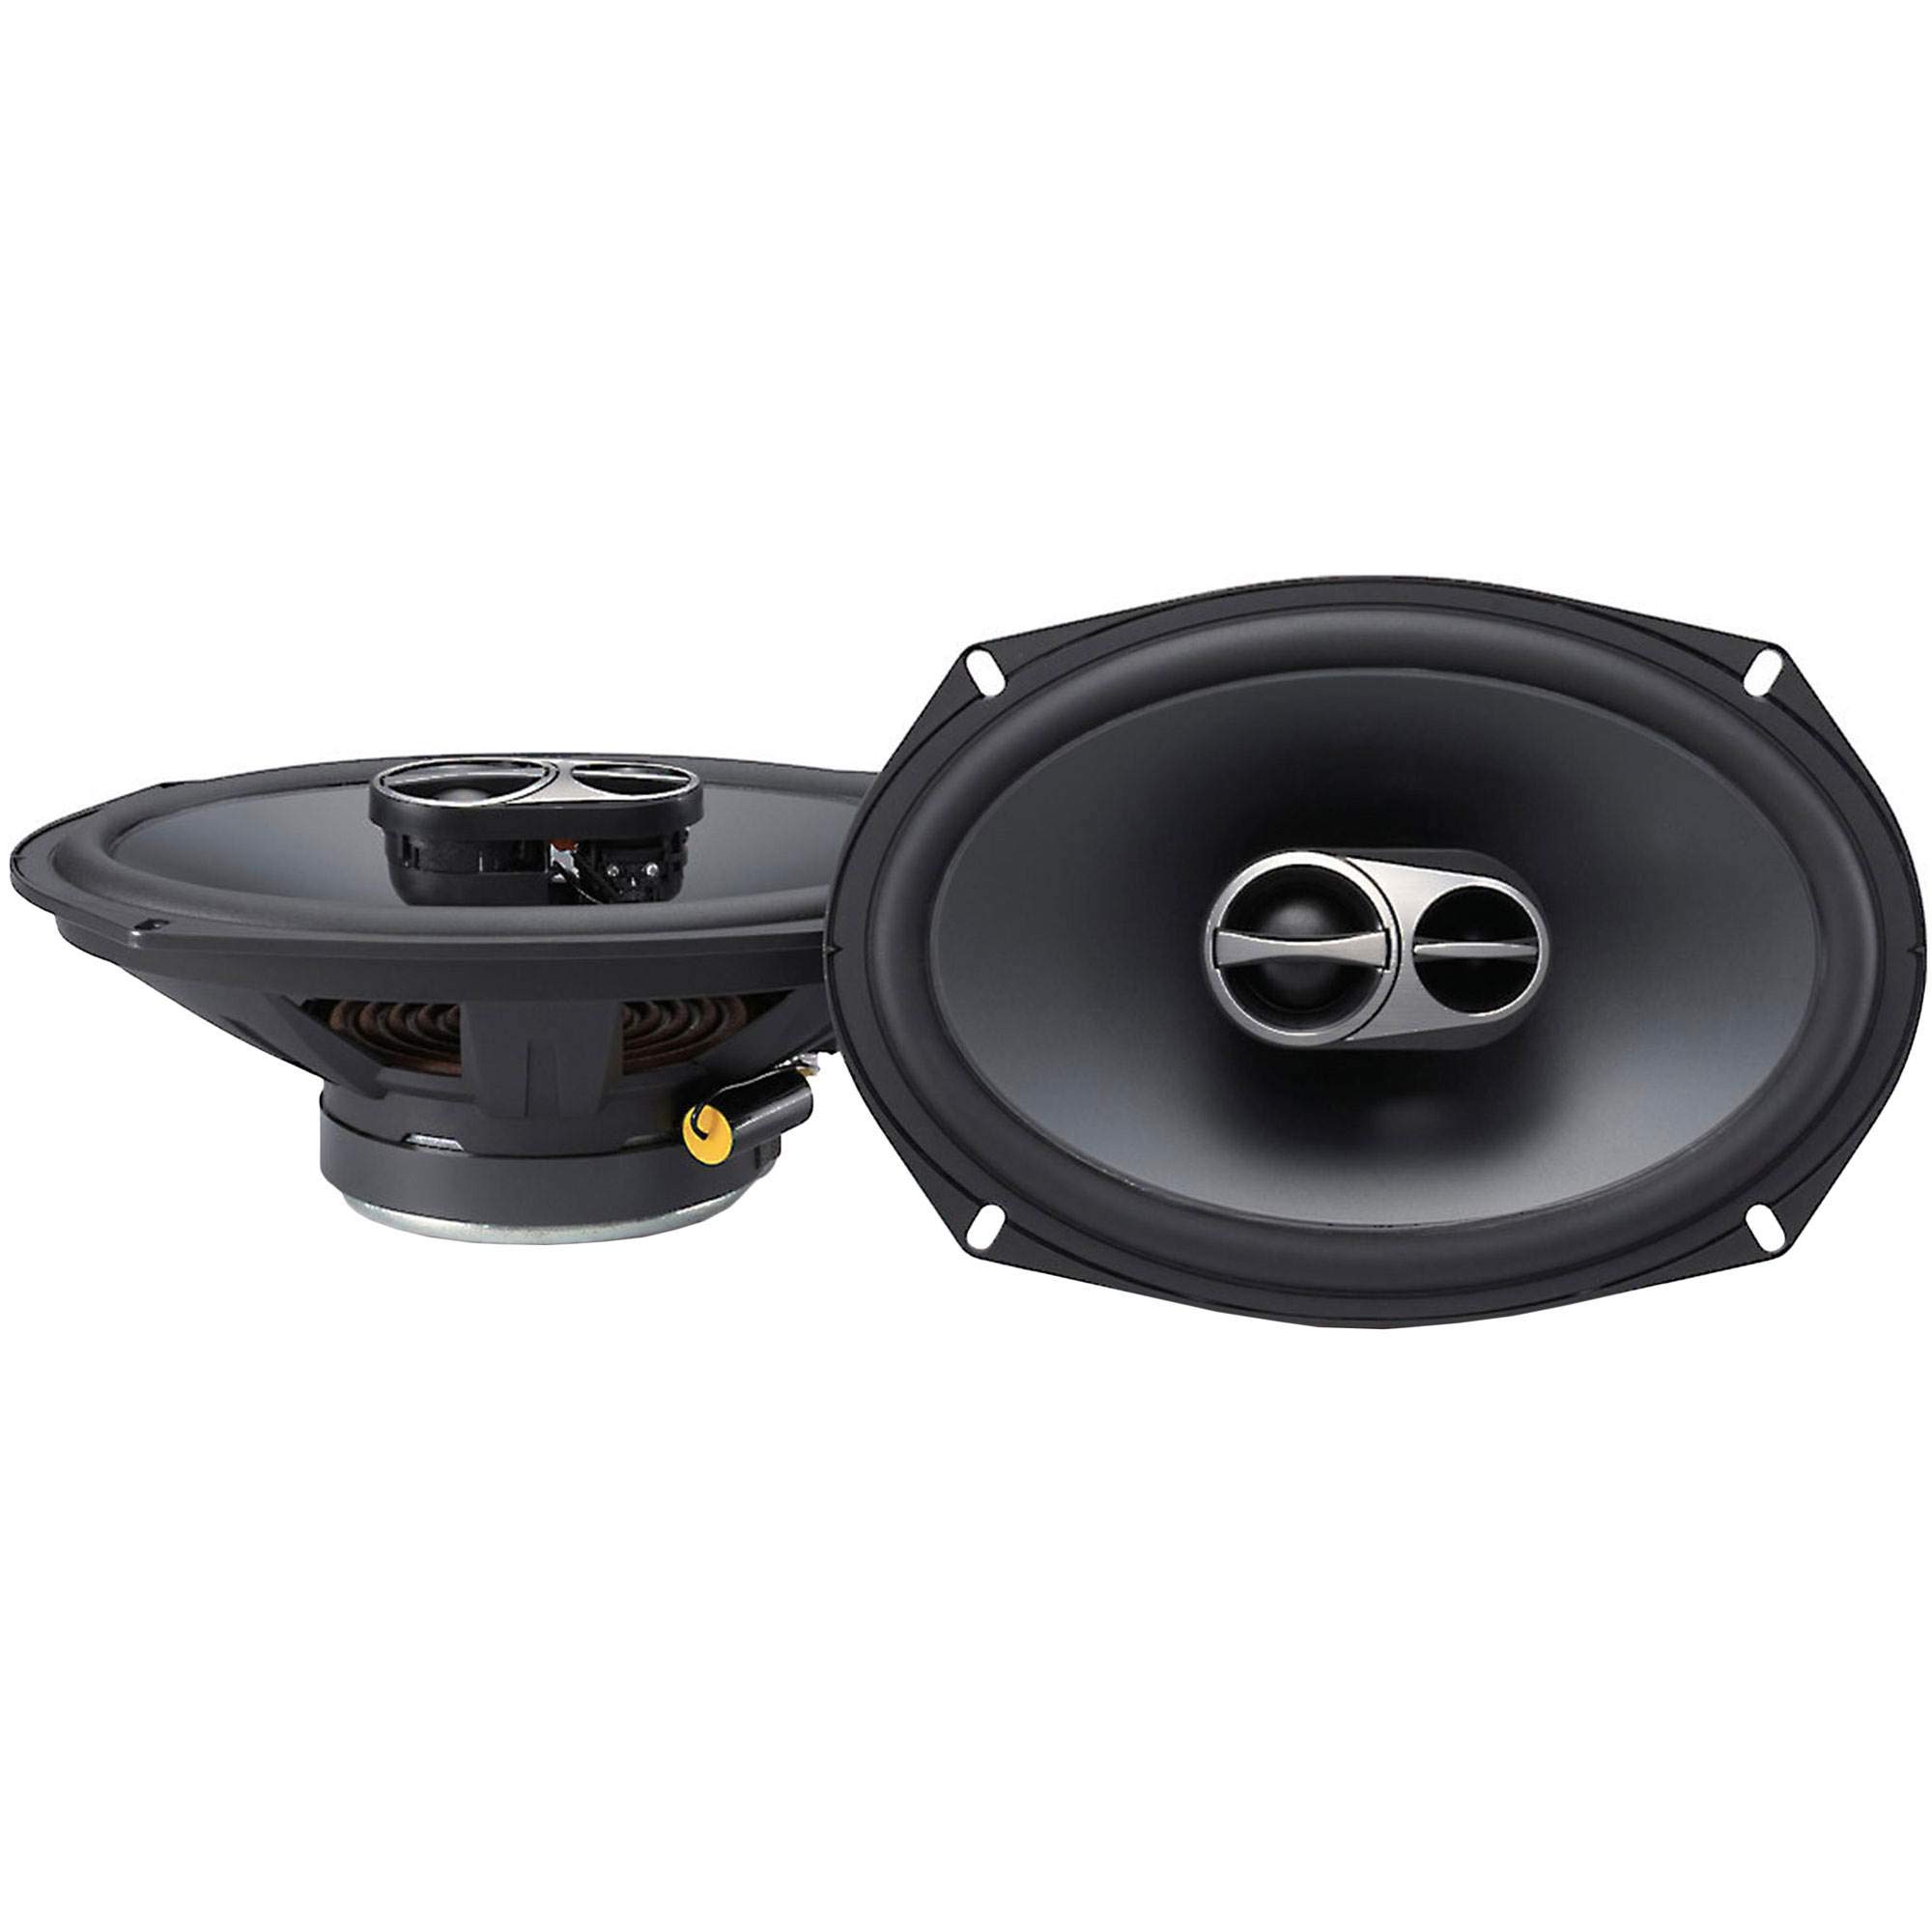 Pioneer TS-A6990F A Series 6"X9" 700 Watts Max 5-Way Car Speakers Pair with Carbon and Mica Reinforced Injection Molded Polypropylene (IMPP) Cone Construction w/Free ALPHASONIK Earbuds